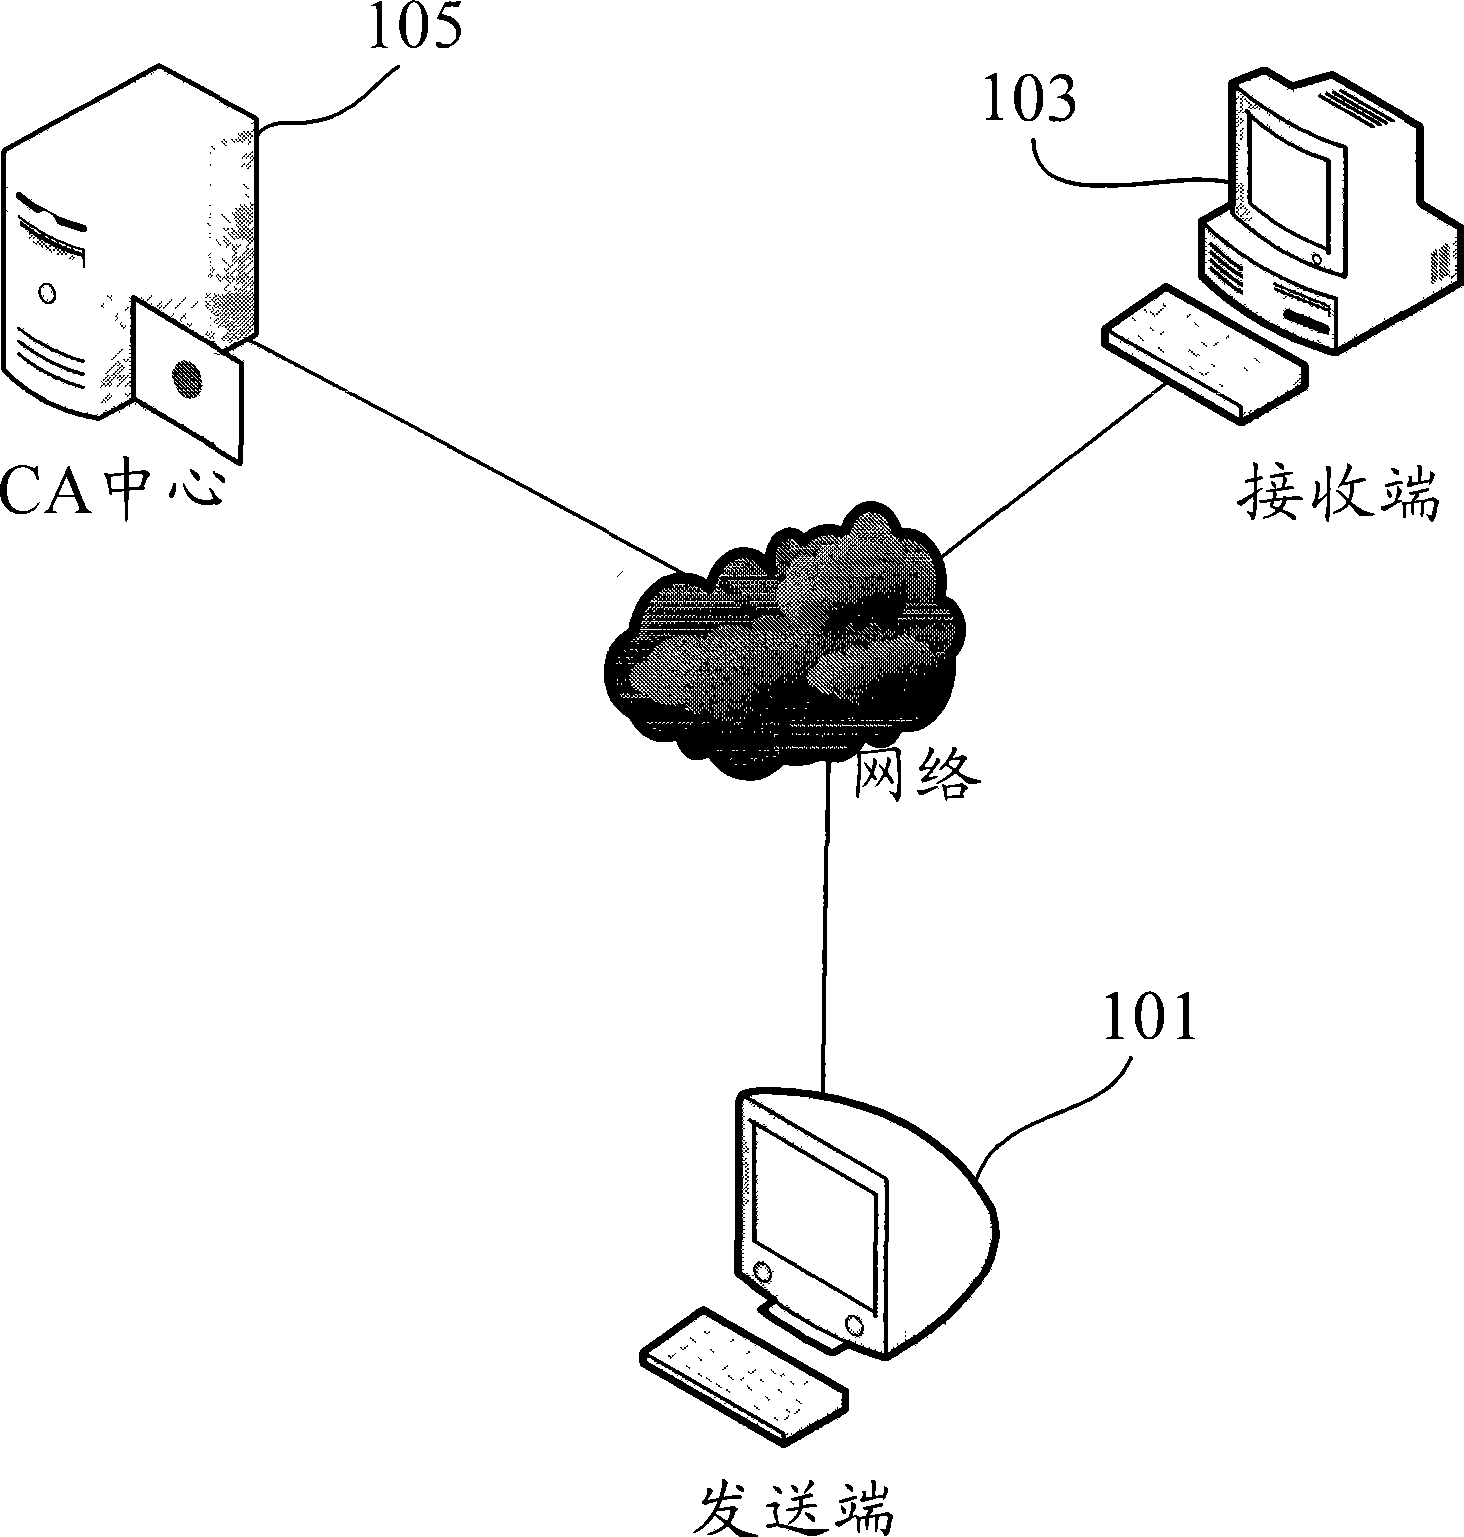 Method and system for identification authentication using biology characteristics